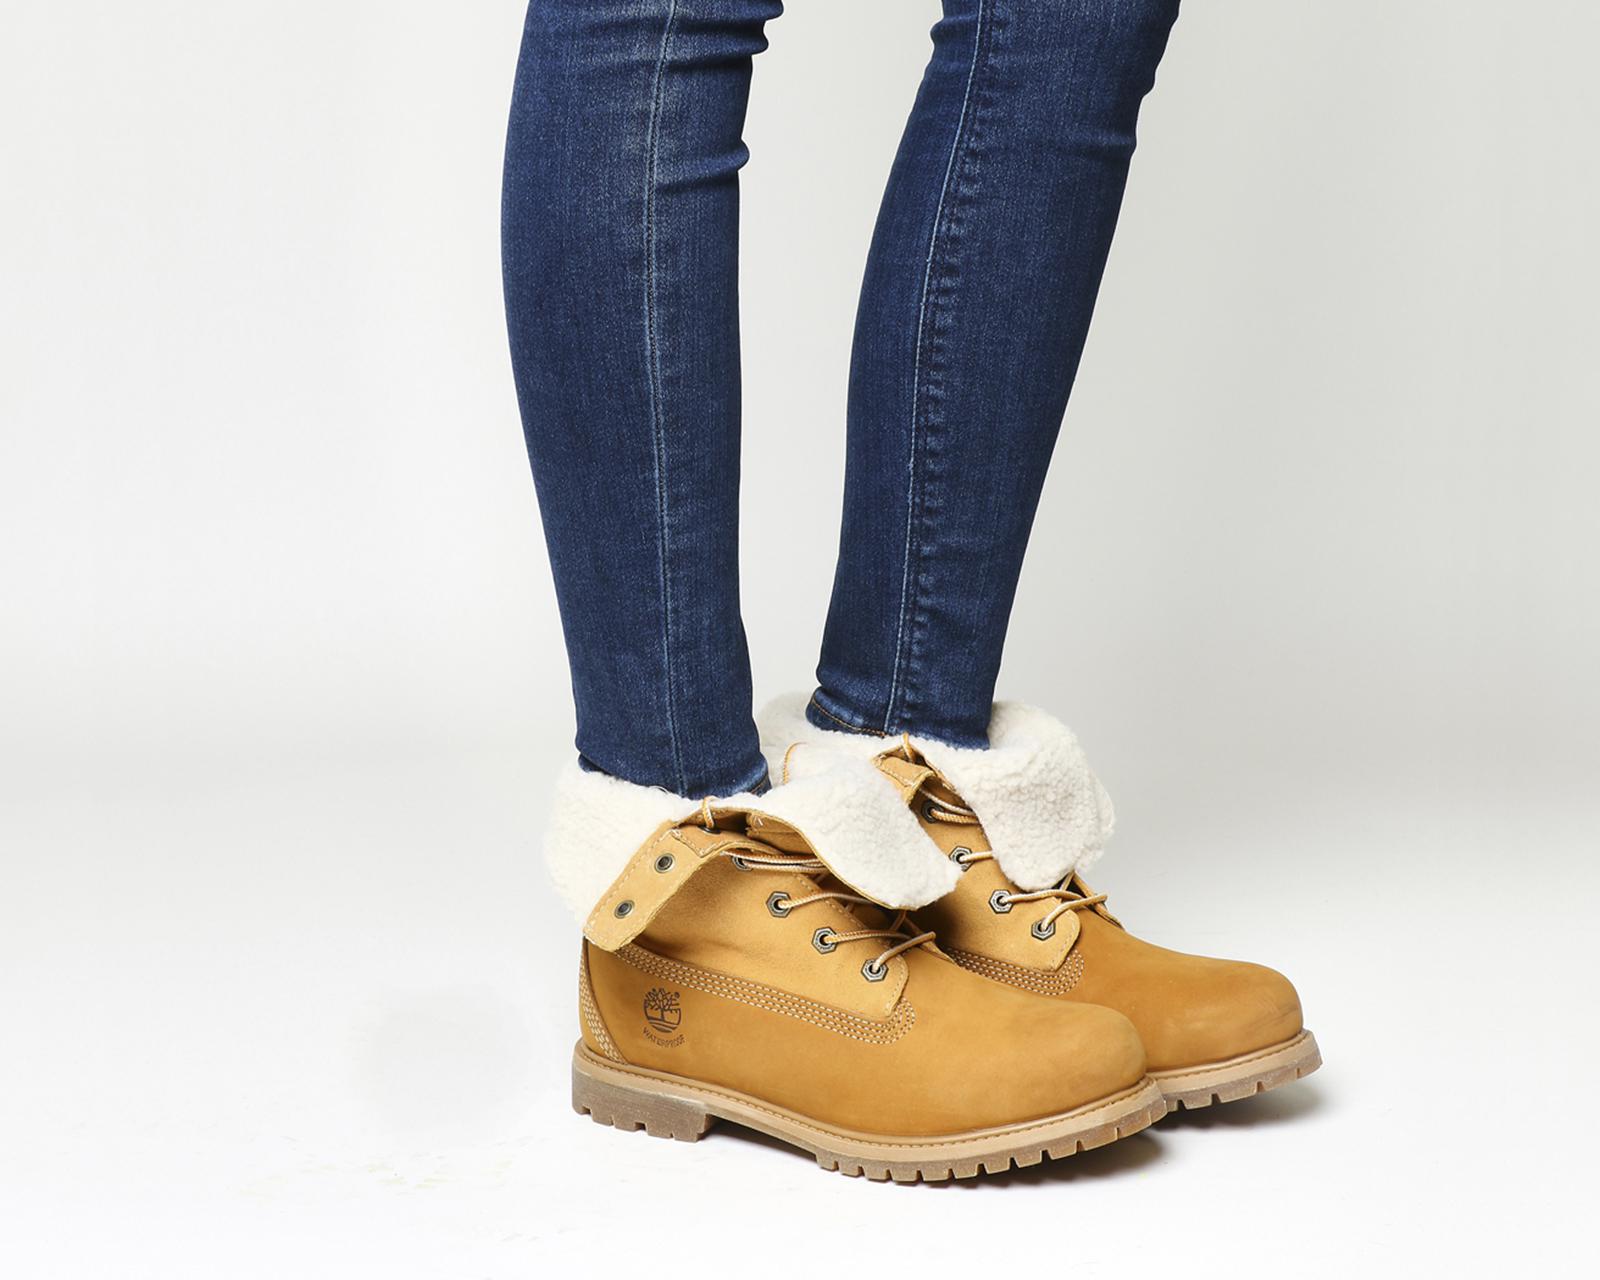 Timberland Teddy Fleece Boots in Natural - Lyst